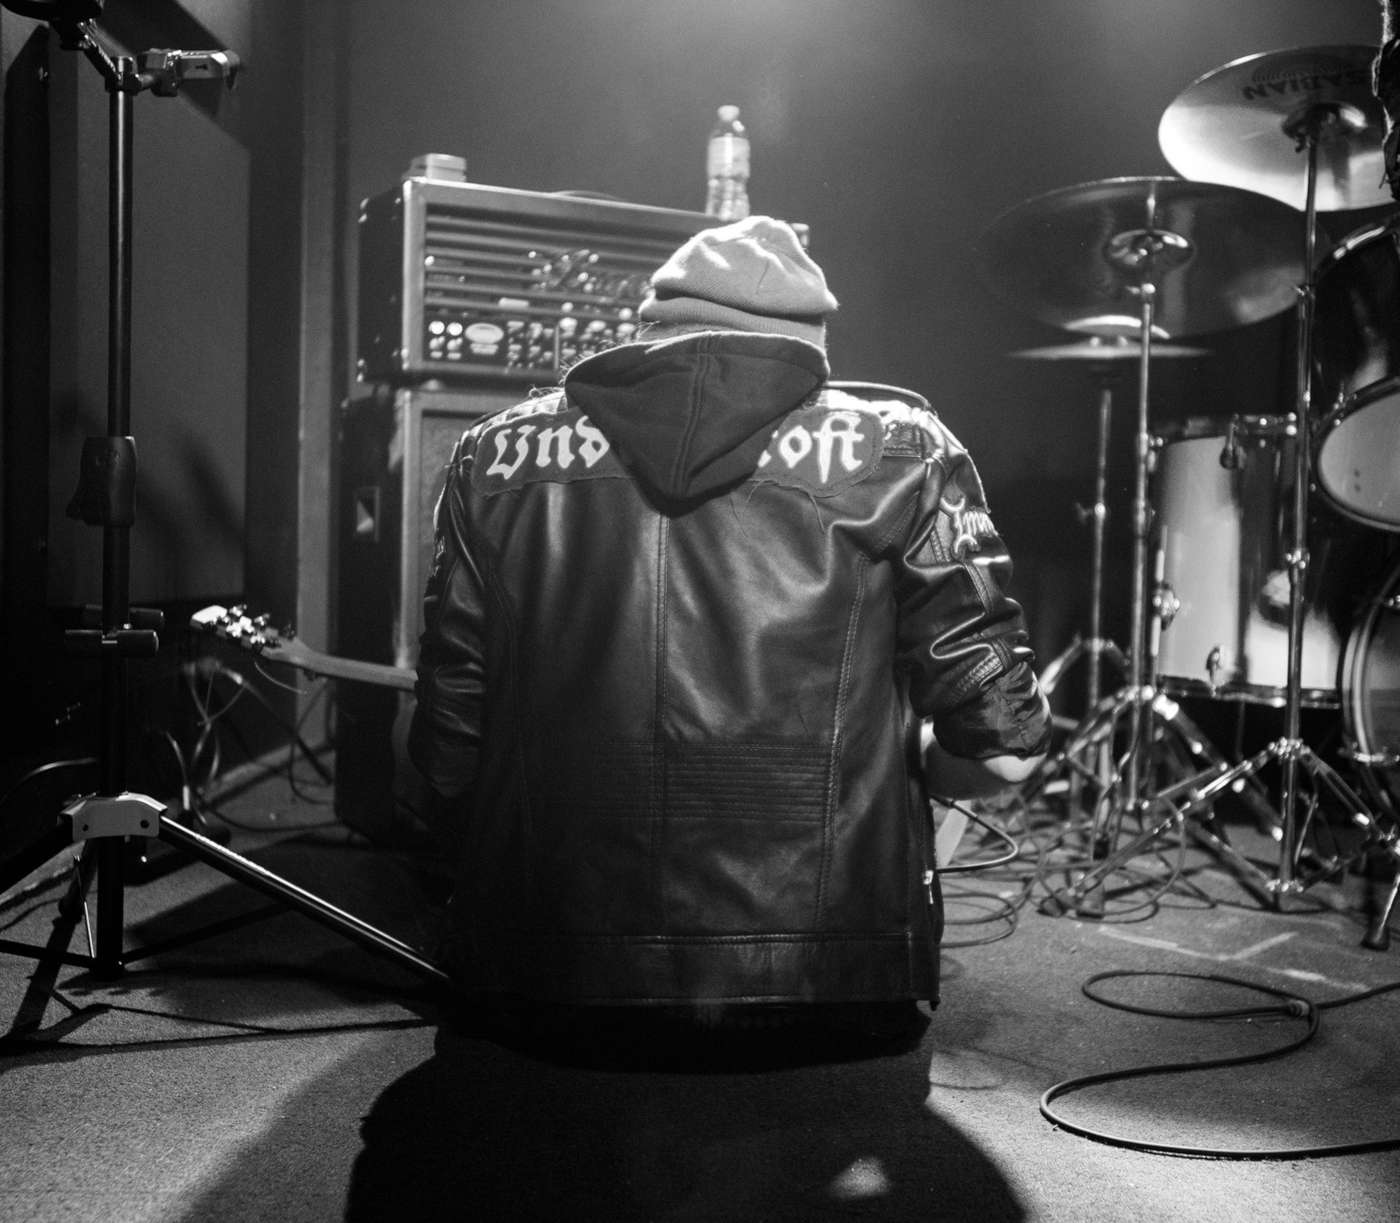 Photograph of Undercroft black metal band guitarist on stage. Jacket has Undercroft backpatch.